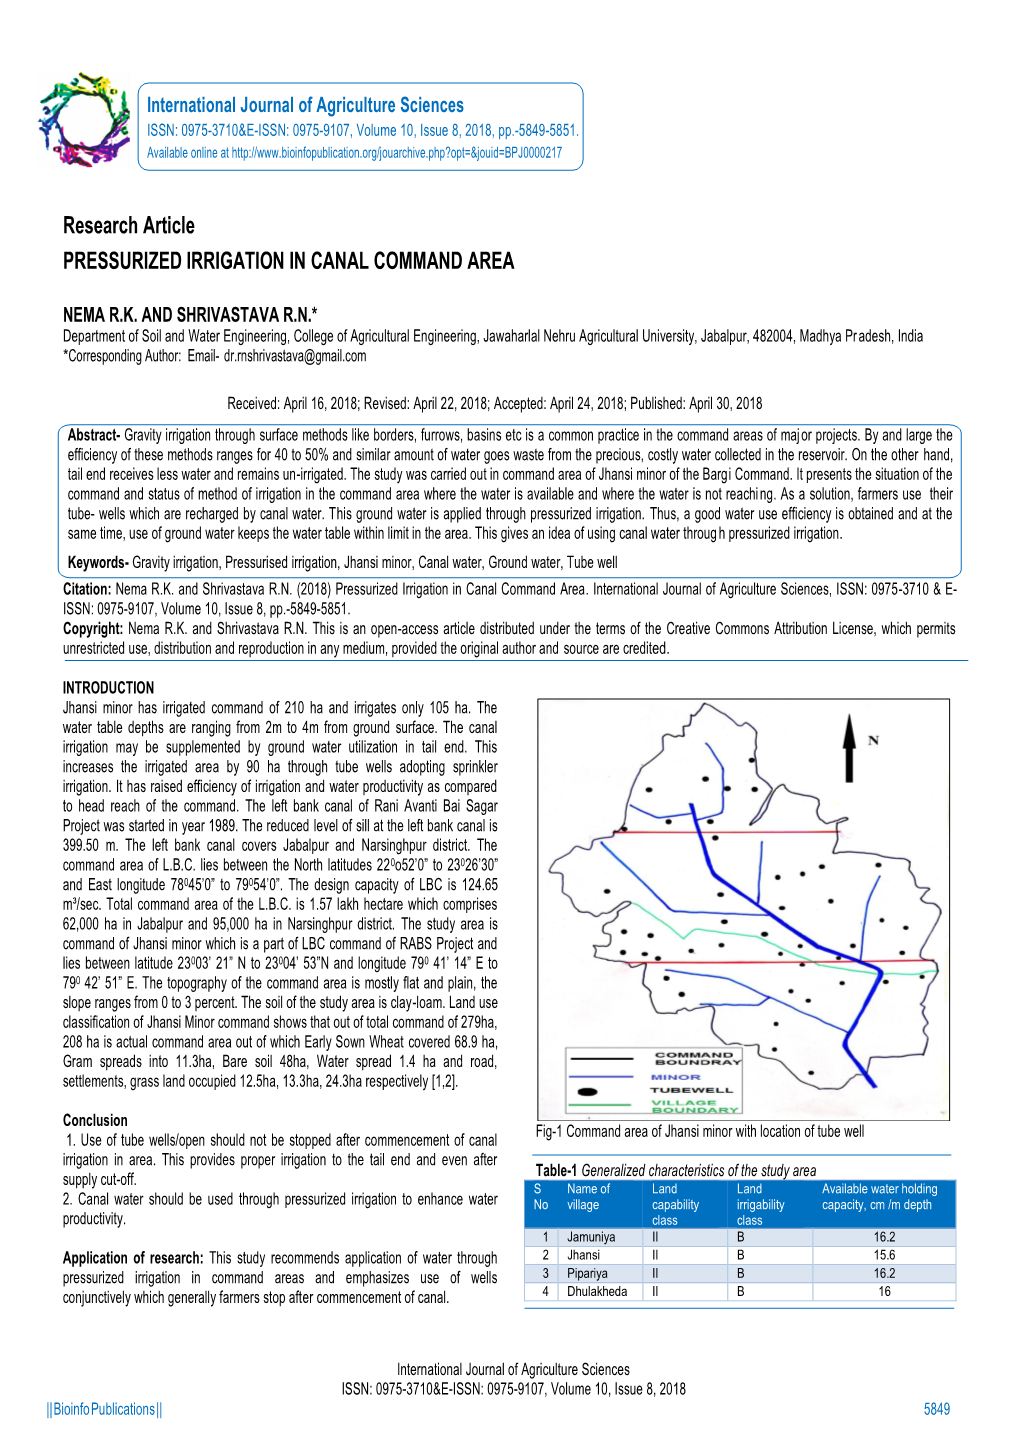 Research Article PRESSURIZED IRRIGATION in CANAL COMMAND AREA